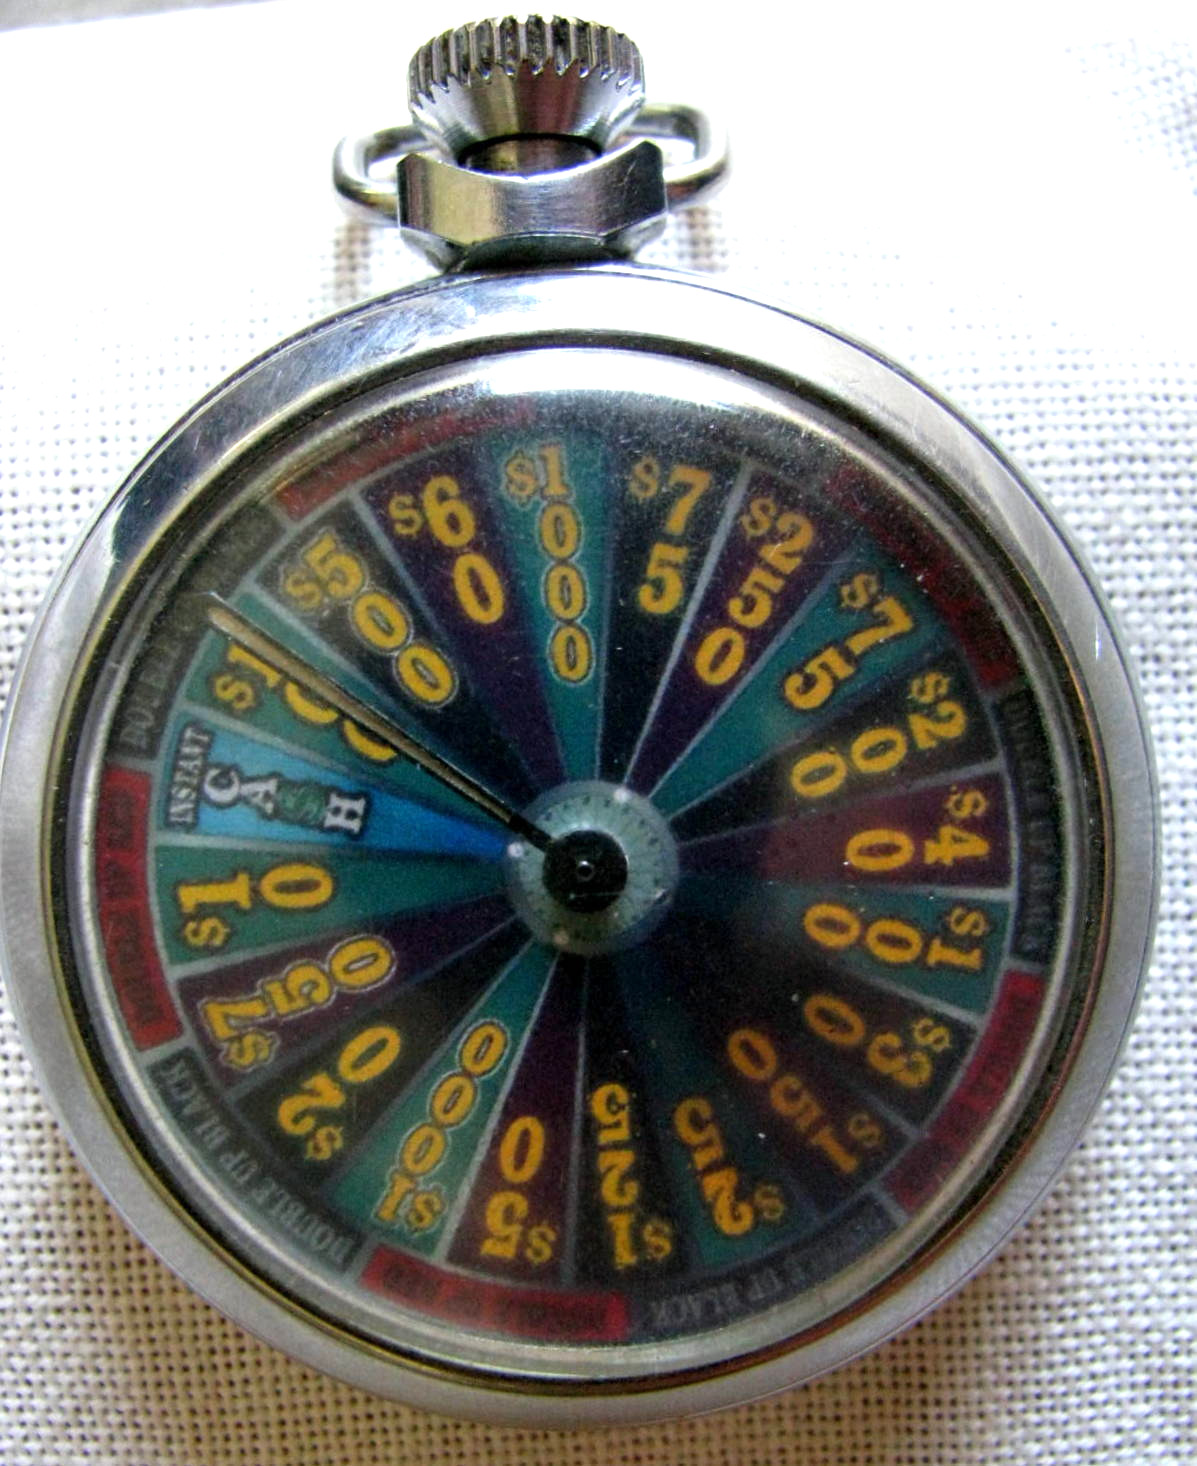 FINE VINTAGE POCKET STYLE $10 TO $1,000 DENOMINATION MECHANICAL GAMBLING DEVICE